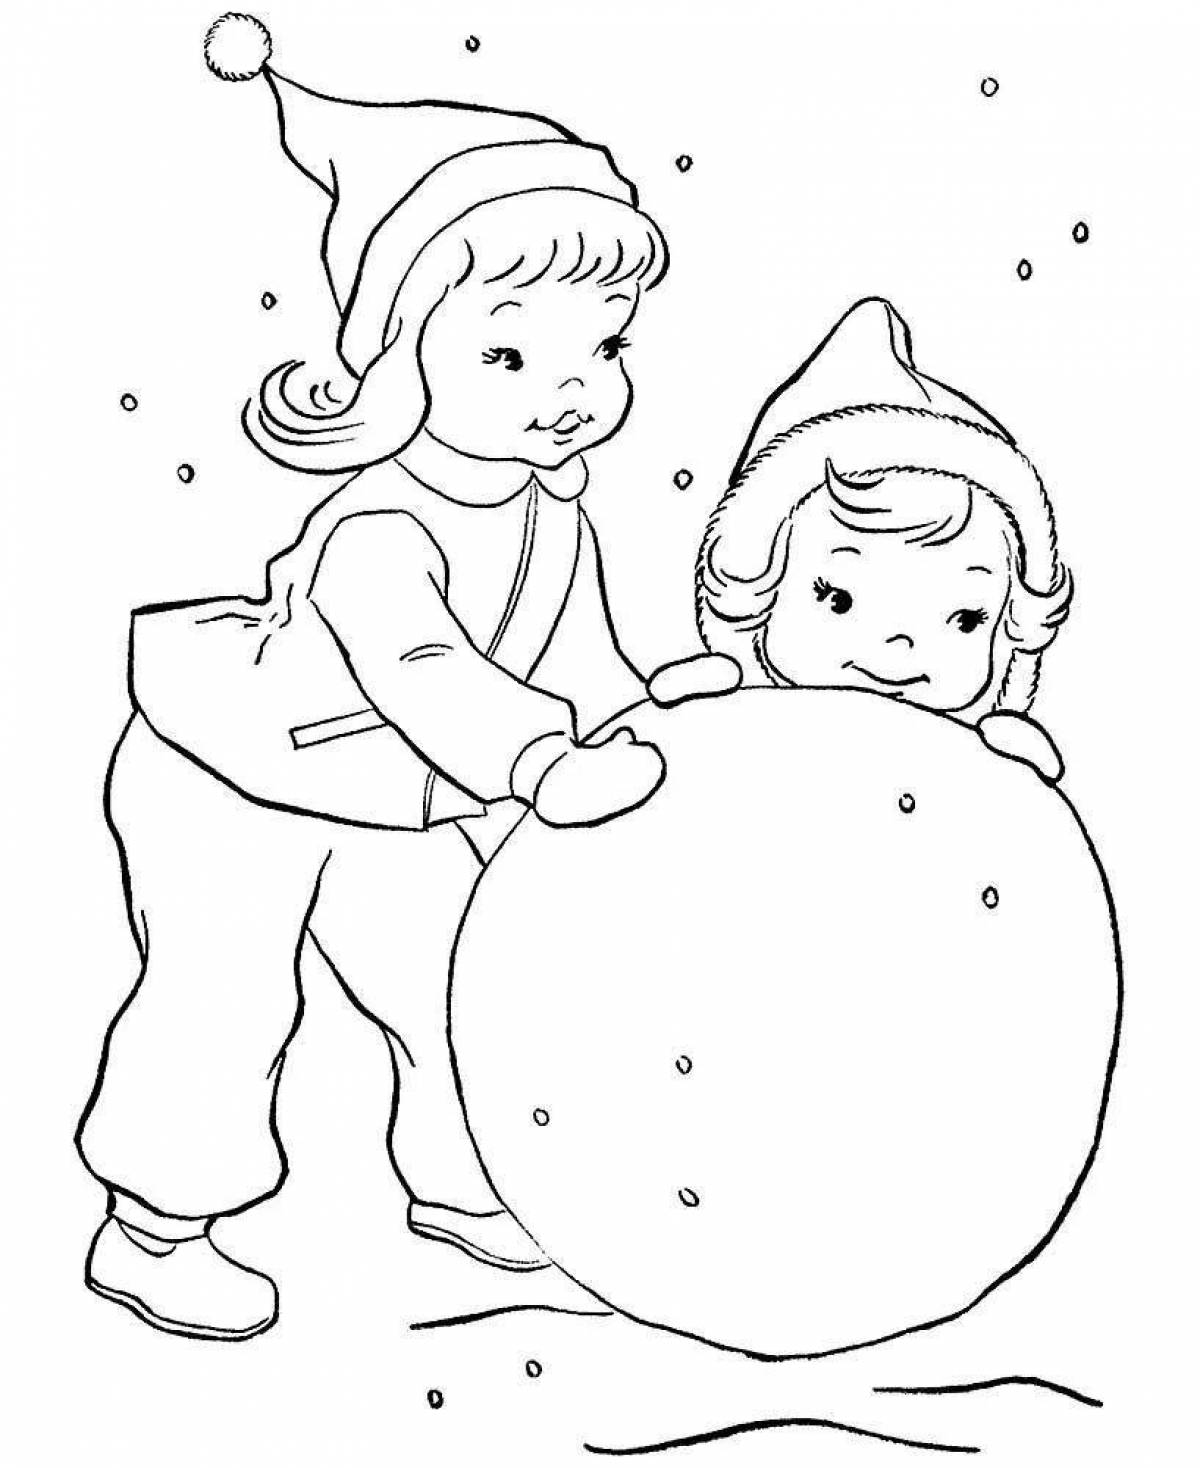 Glowing snowball coloring page